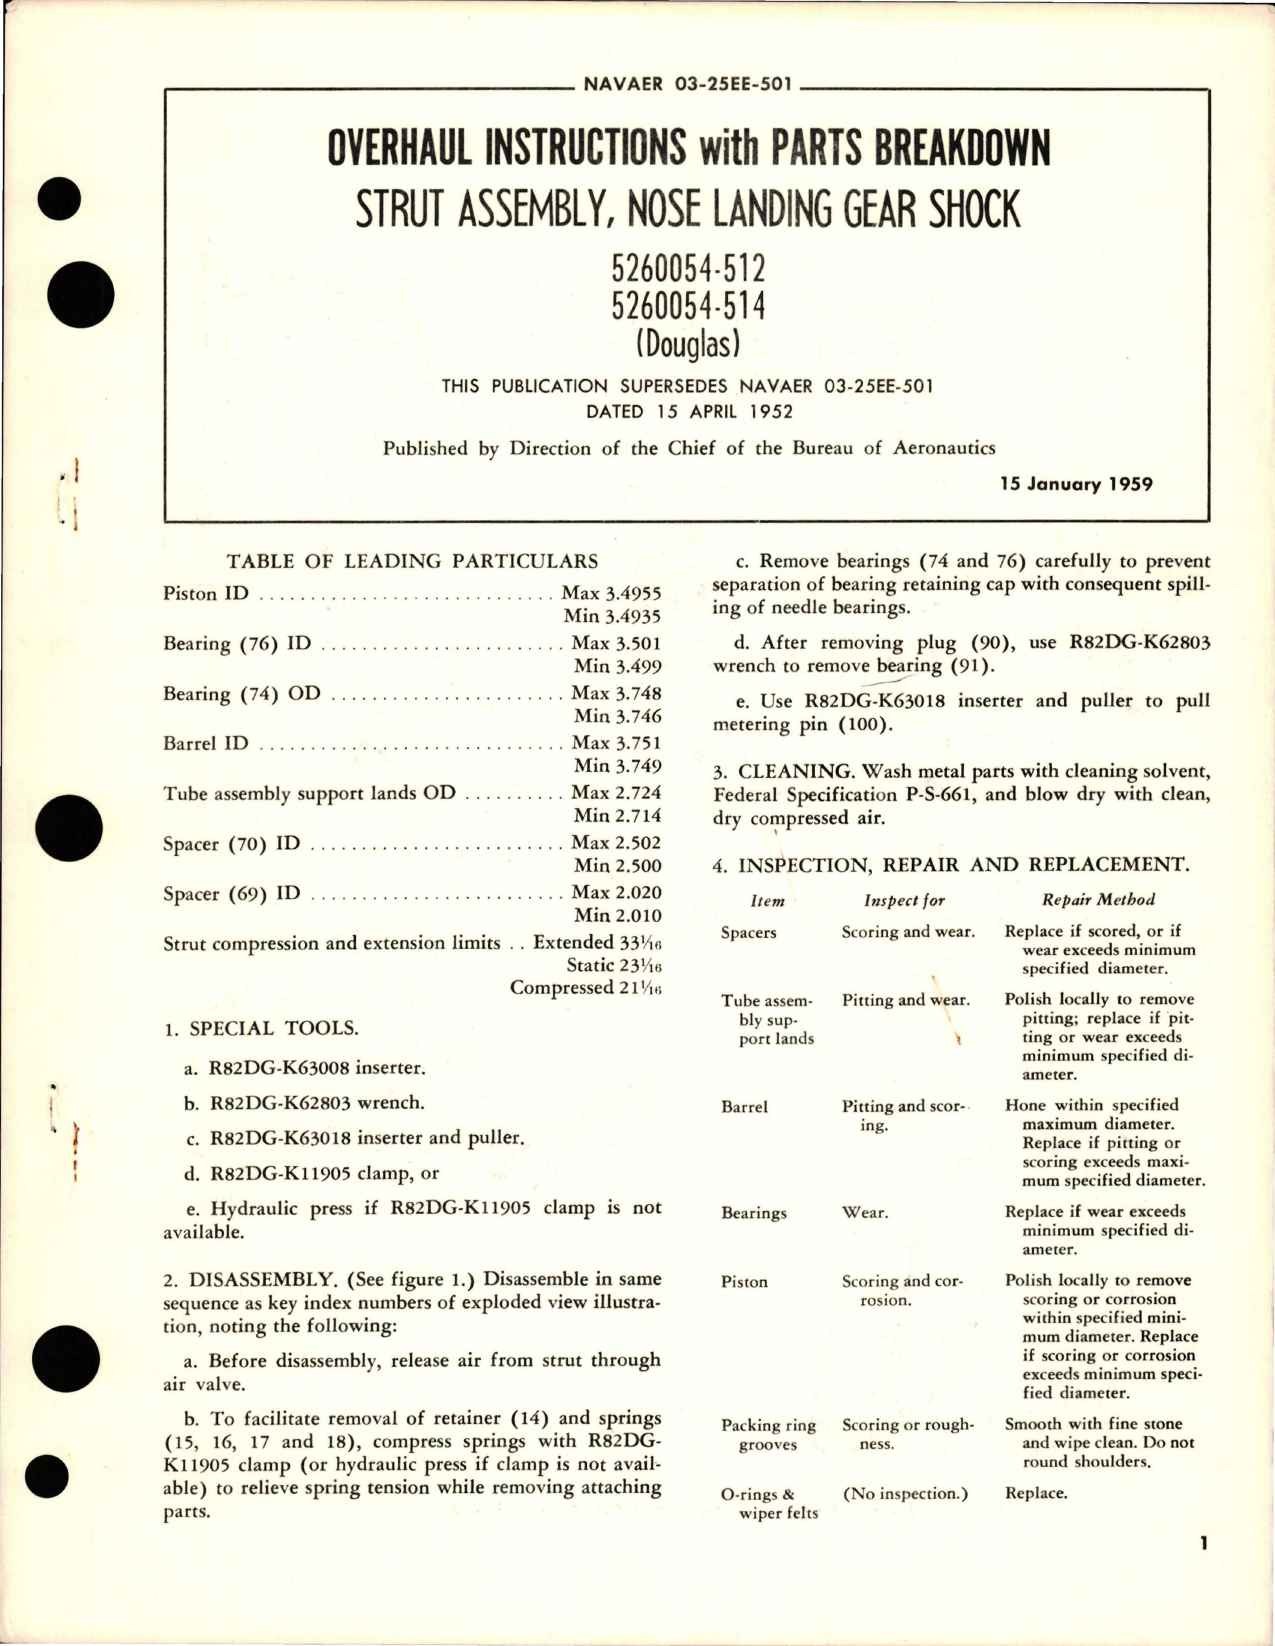 Sample page 1 from AirCorps Library document: Overhaul Instructions with Parts Breakdown for Nose Landing Gear Shock Strut Assembly - 5260054-512 and 5260054-514